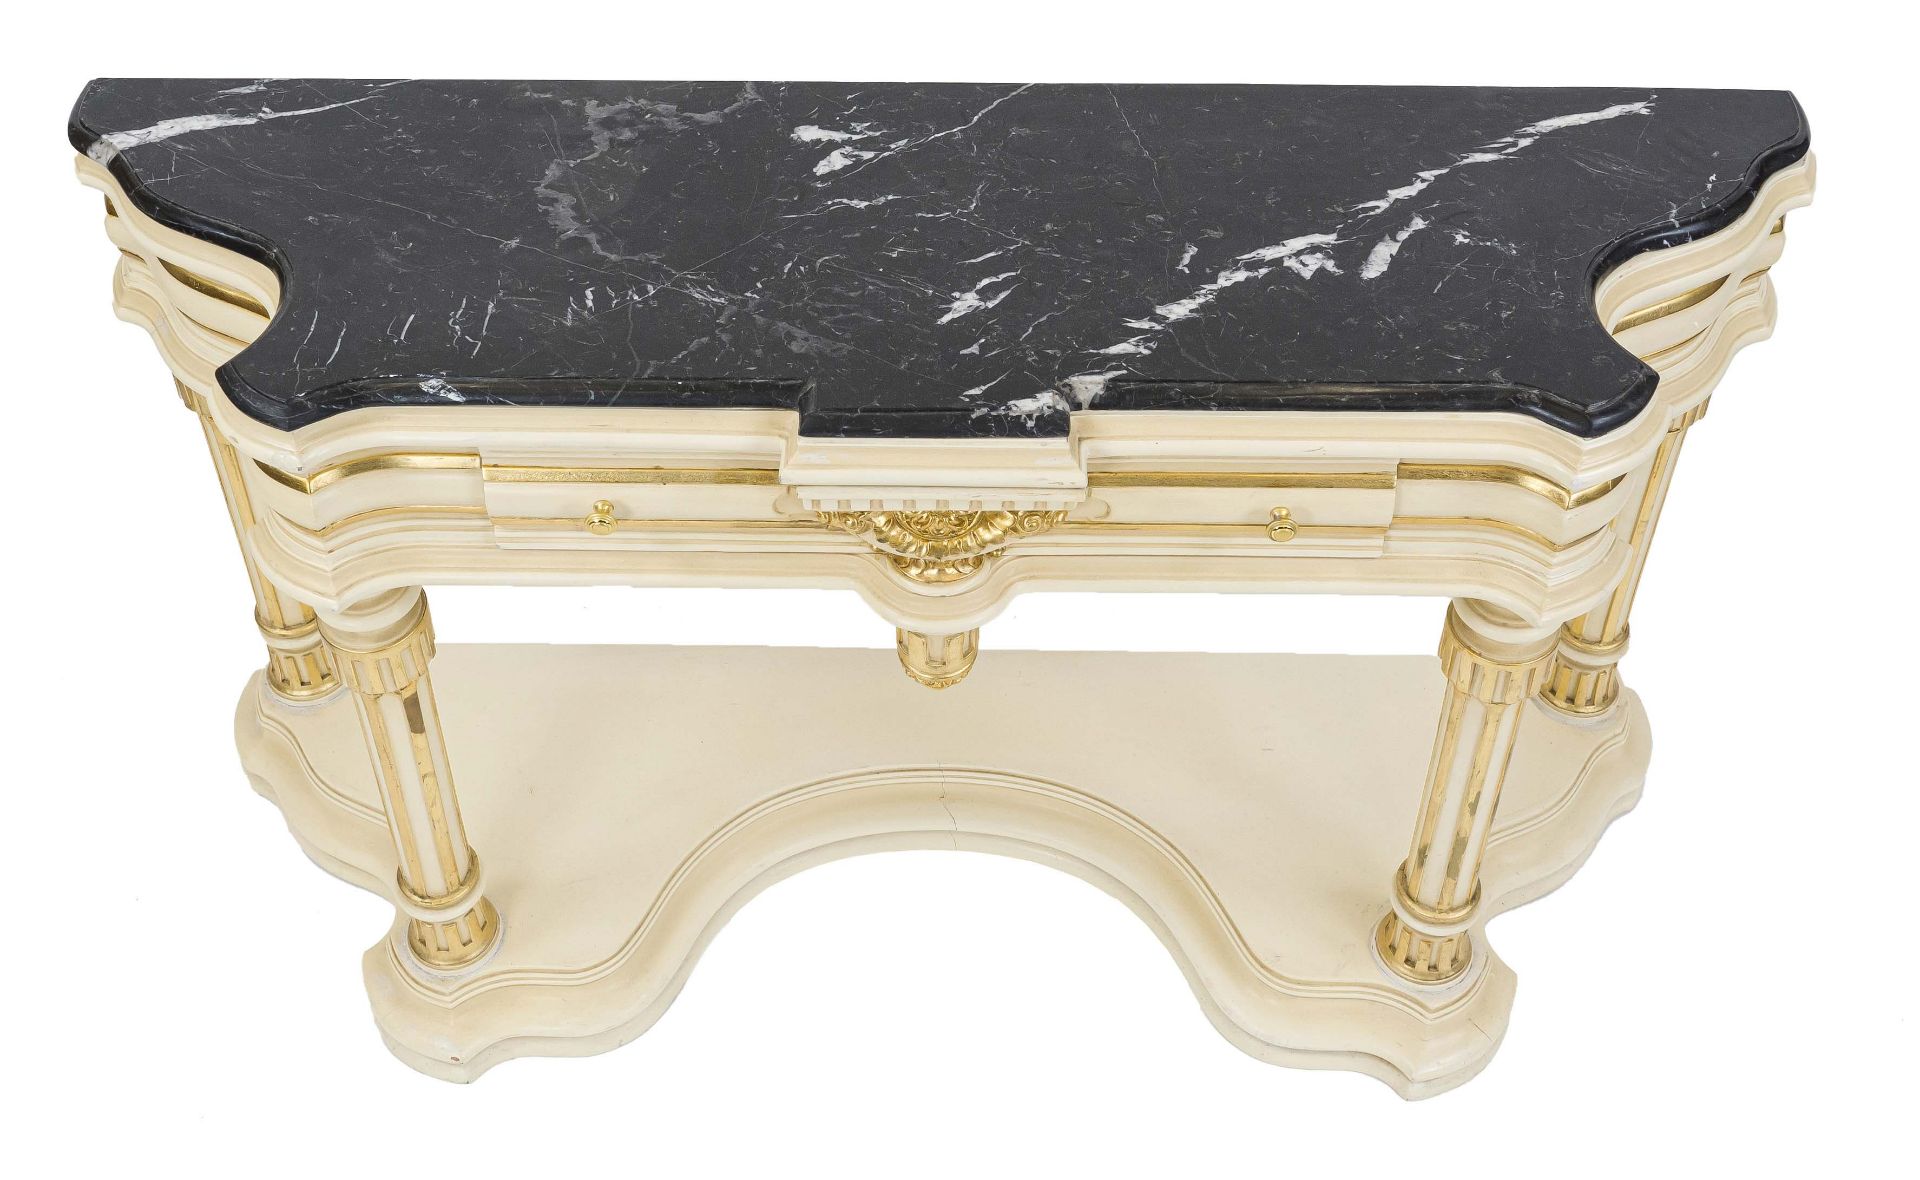 Console in Louis-Seize style, 20th century, wood carved, painted and partly gilded, standing on four - Image 2 of 3